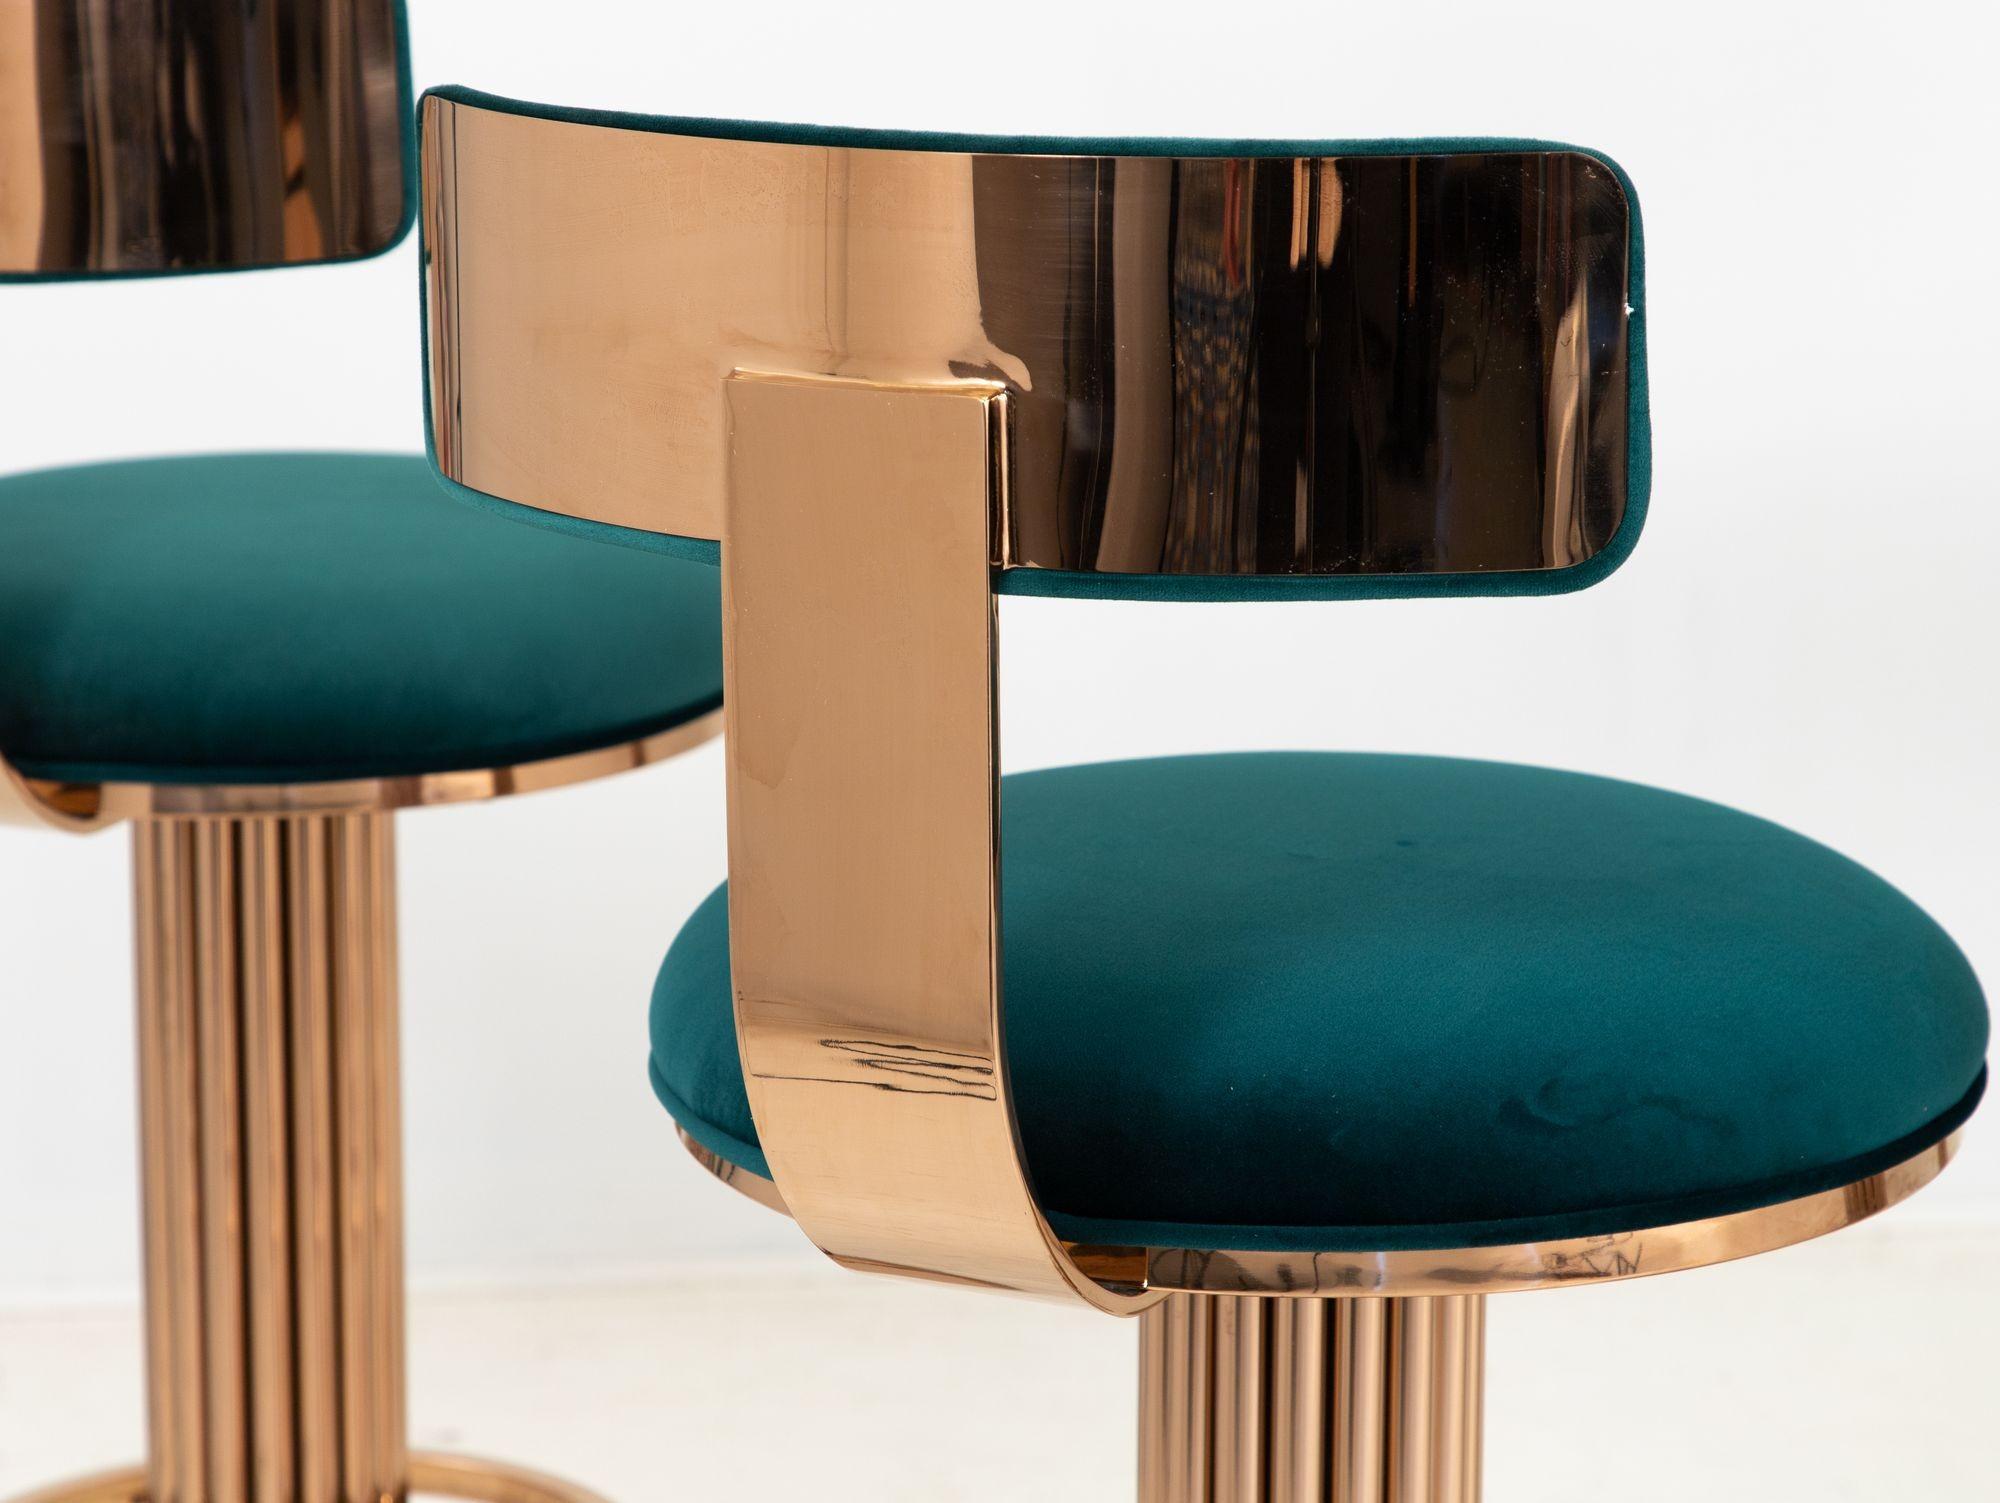 Art Deco Set of Four Rose Gold and Emerald Barstools in the Design For Leisure Style